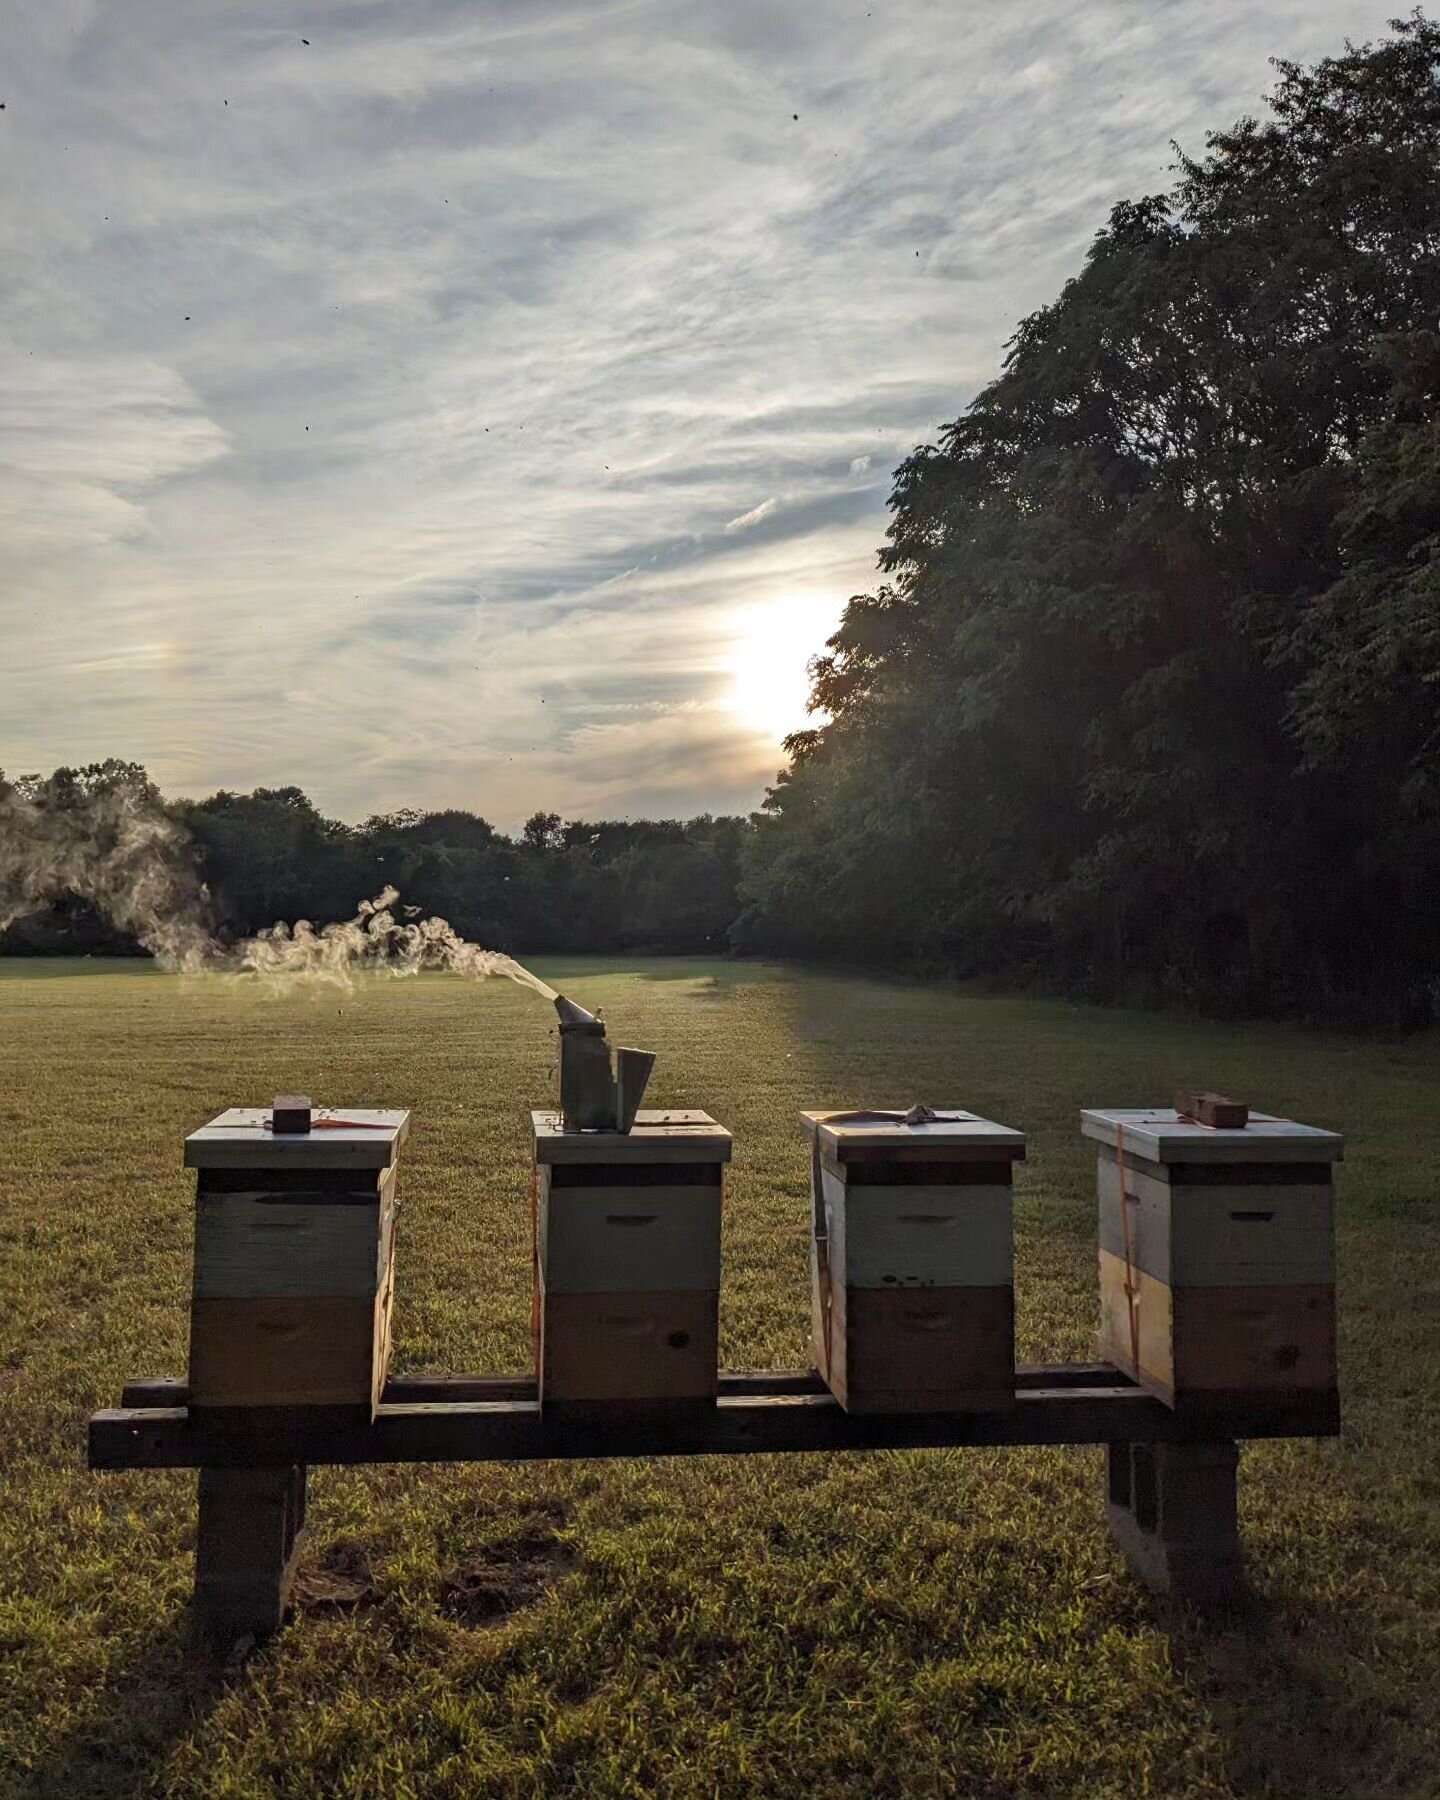 Today is an exciting day at the Nectary. We have been watching the days grow shorter as we creep closer to old man winter. Our bees are snuggled up with plenty of food to help them stay warm for the coming months as they will be put to the test. Most